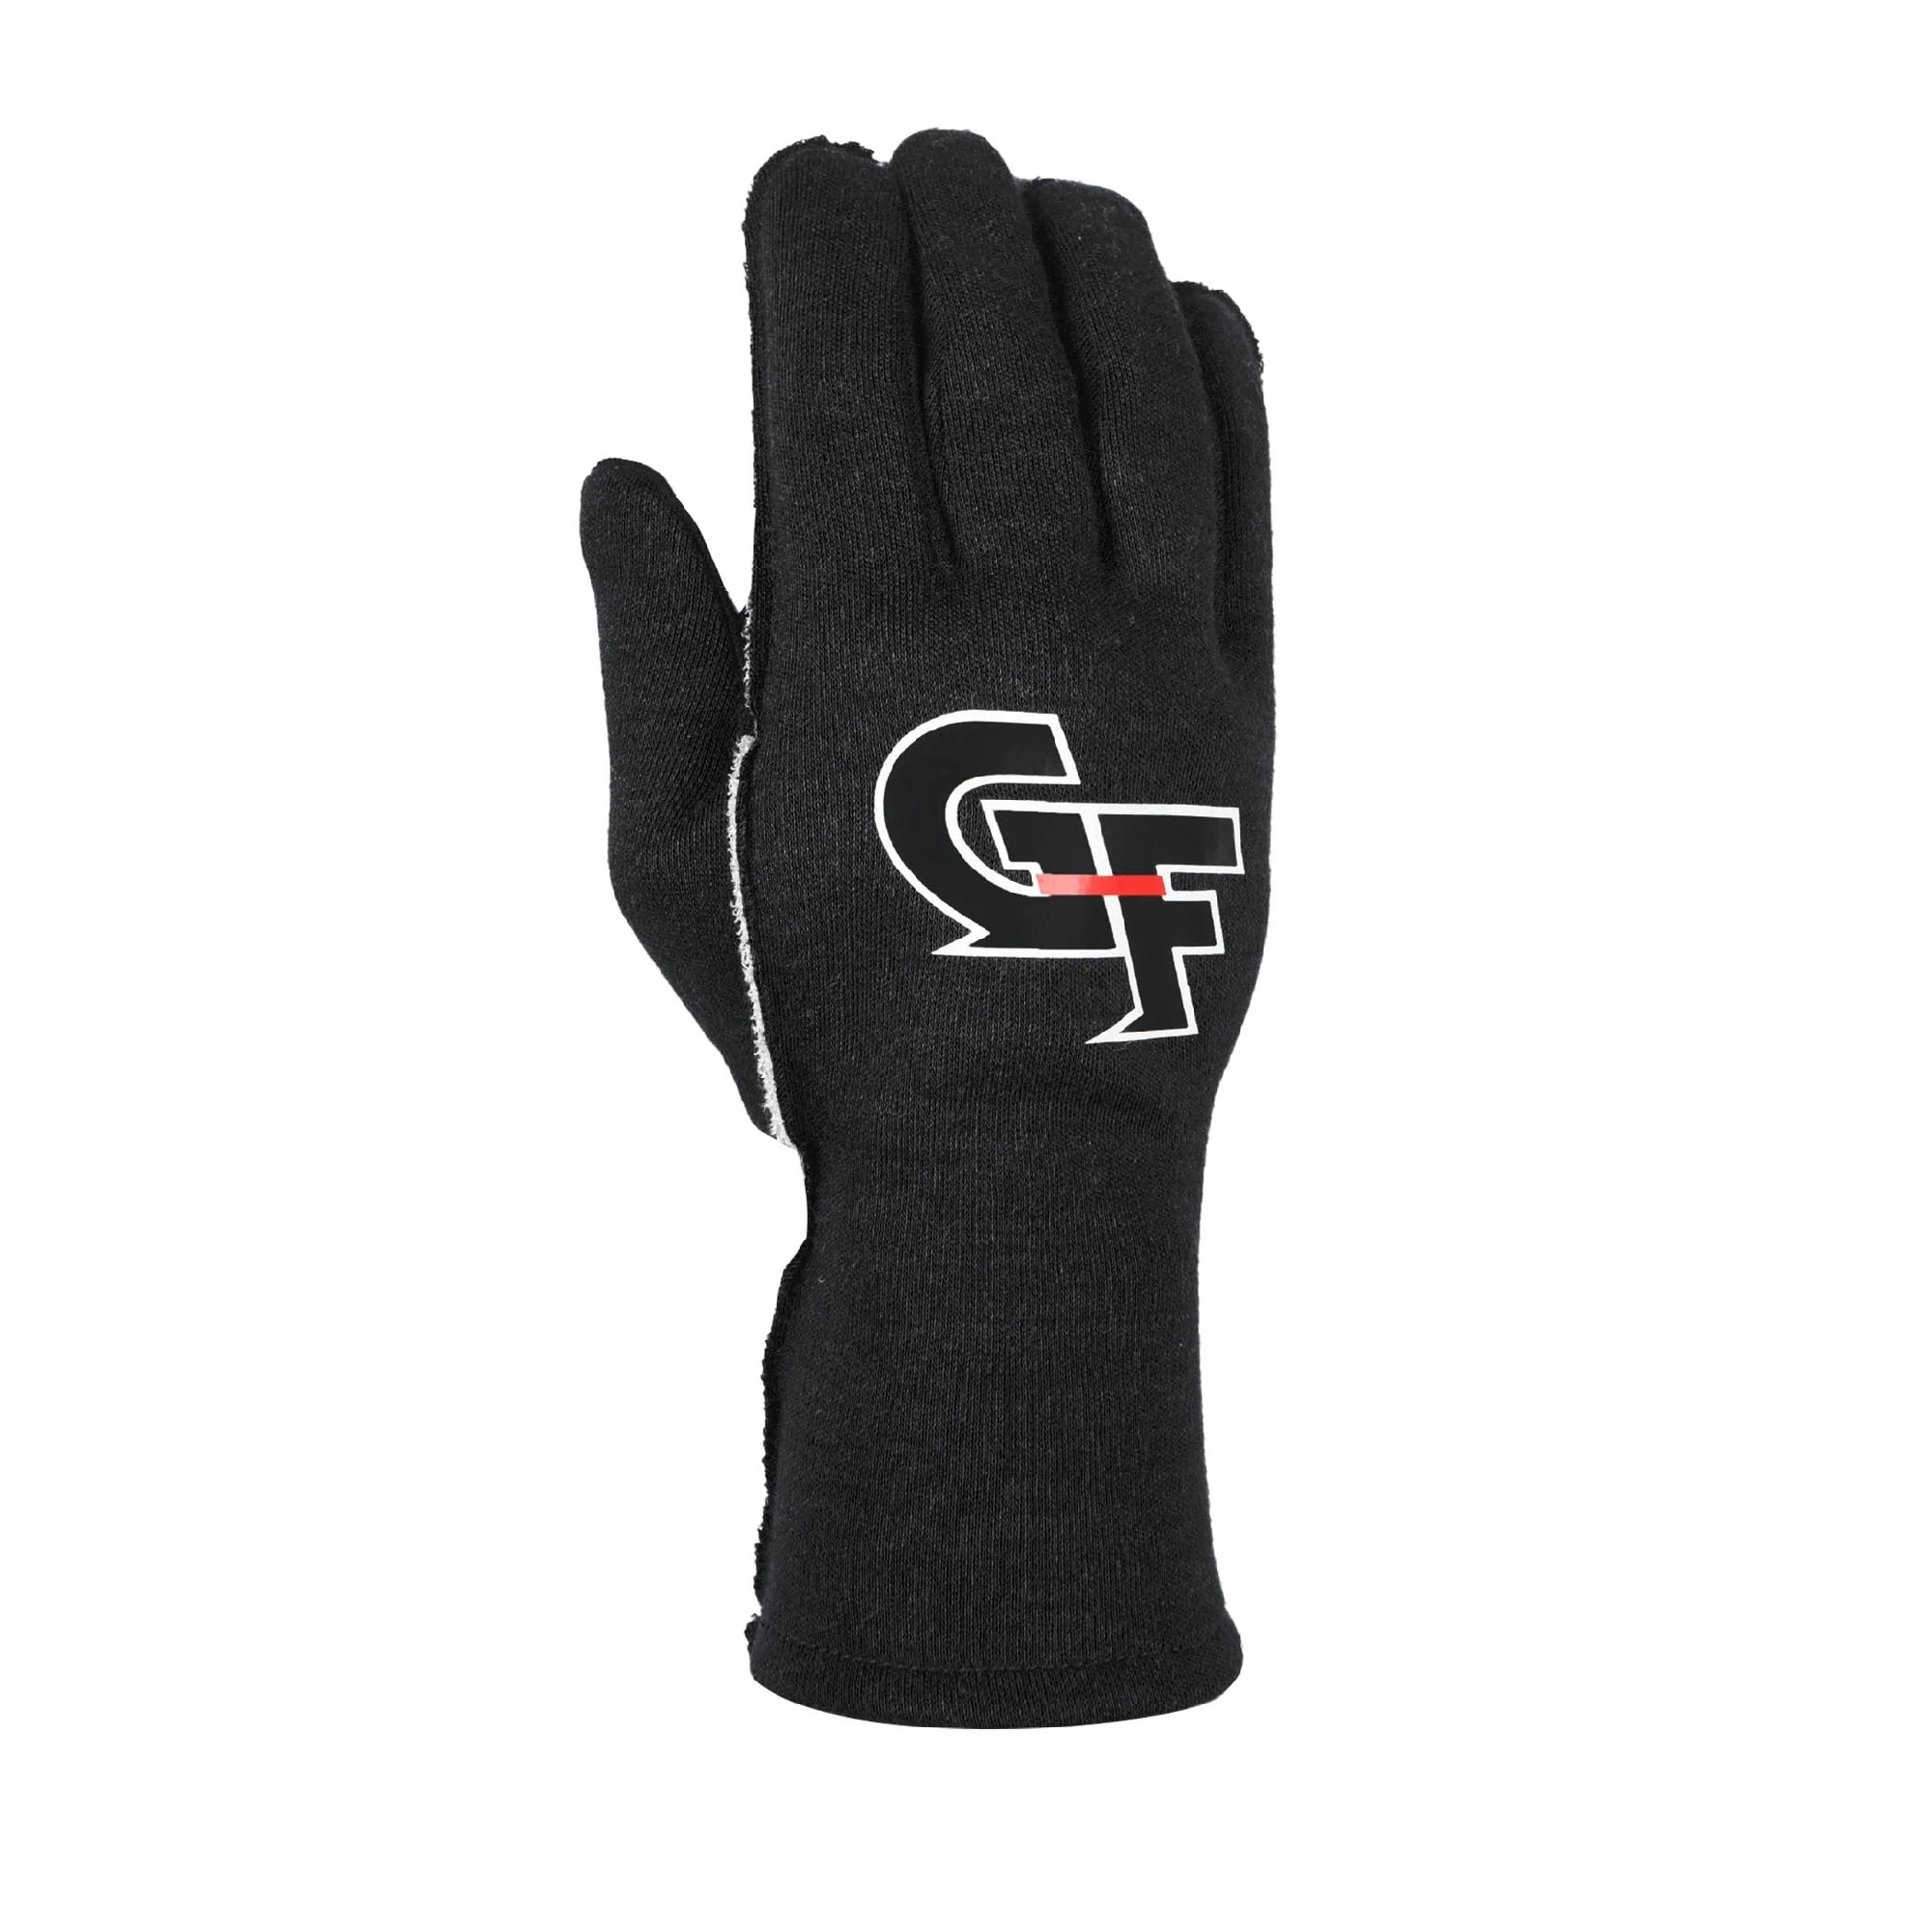 G-FORCE Gloves G-Limit Small Black